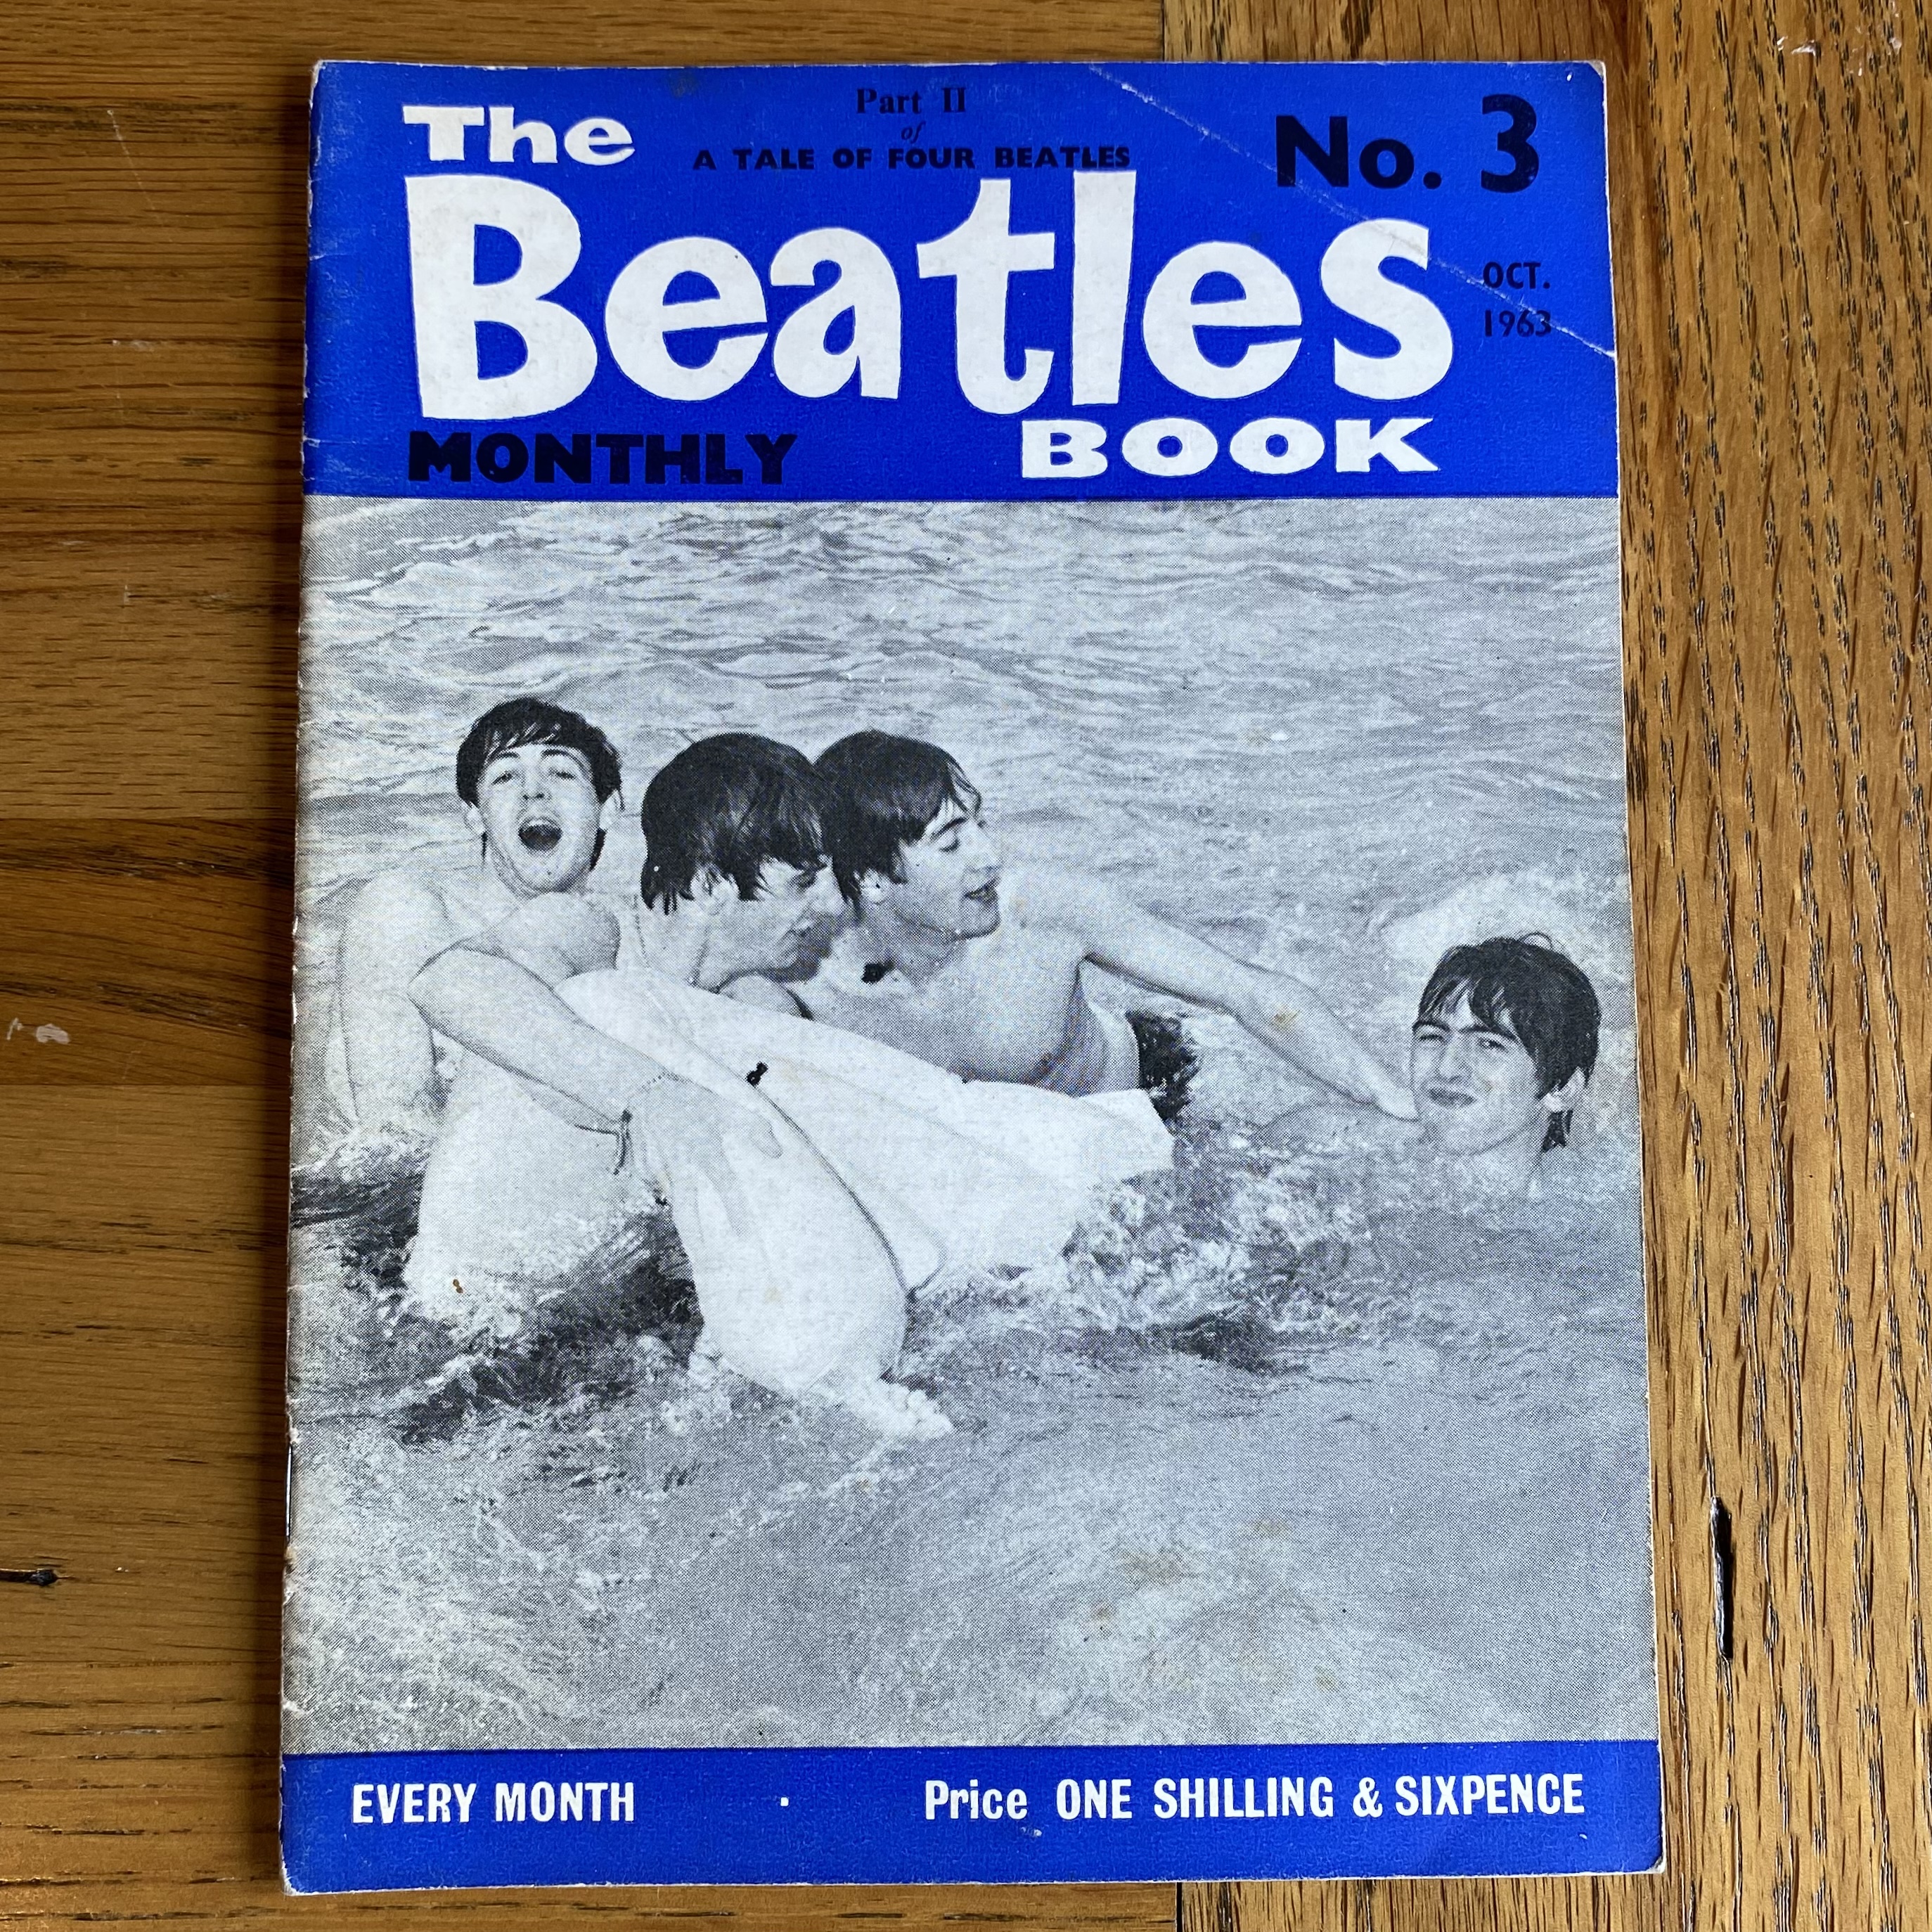 The Beatles Monthly Book No 3